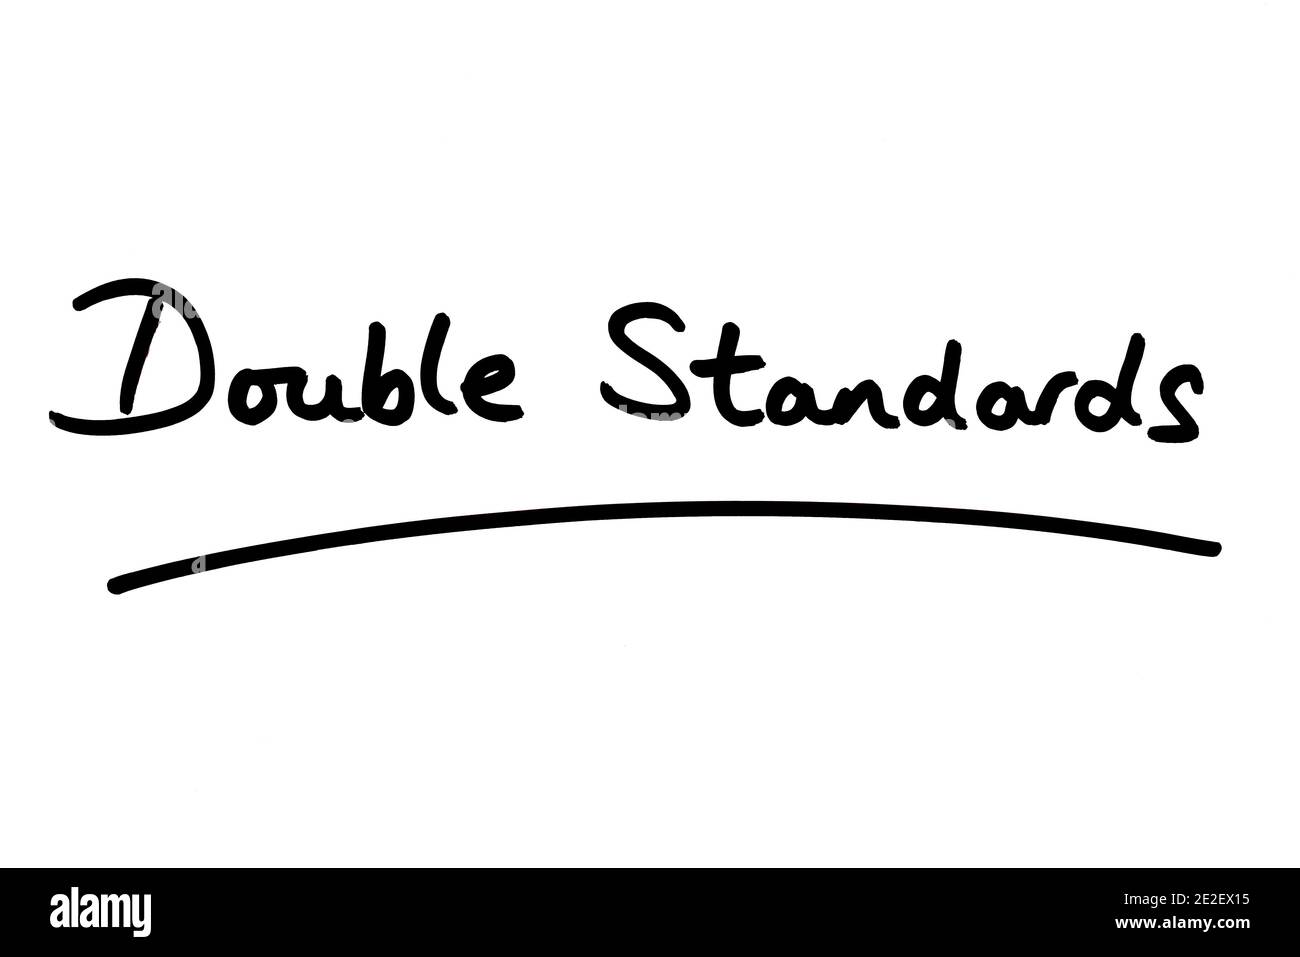 Double Standards handwritten on a white background. Stock Photo